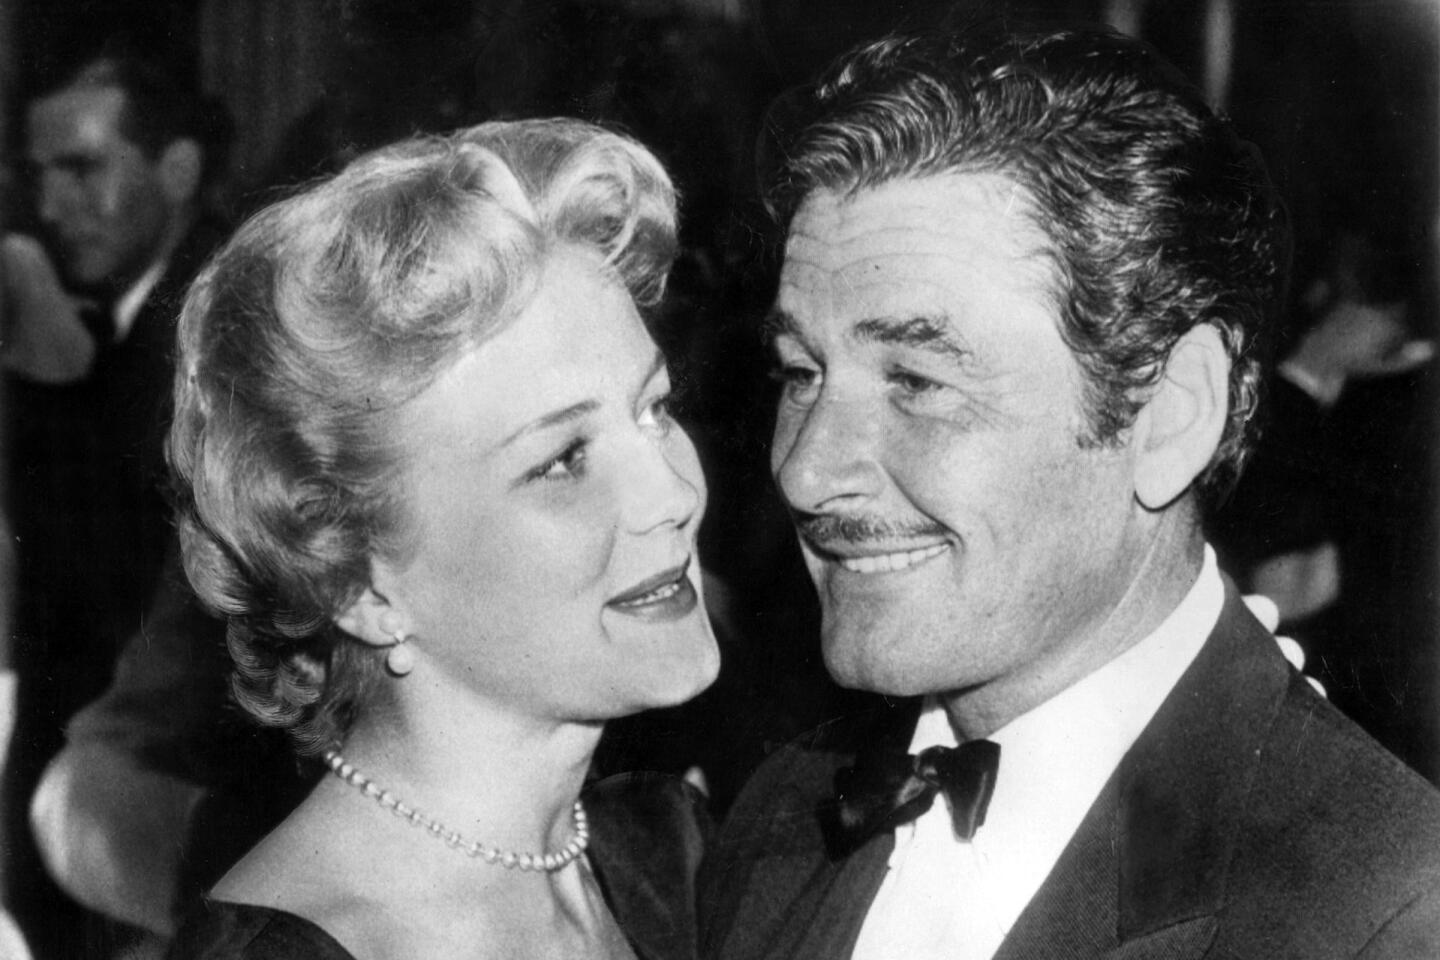 A film and television actress who appeared opposite Frank Sinatra in the original "Ocean's Eleven," Wymore earned wider notice for her real-life role as the third and last wife of matinee idol Errol Flynn. She was 87.